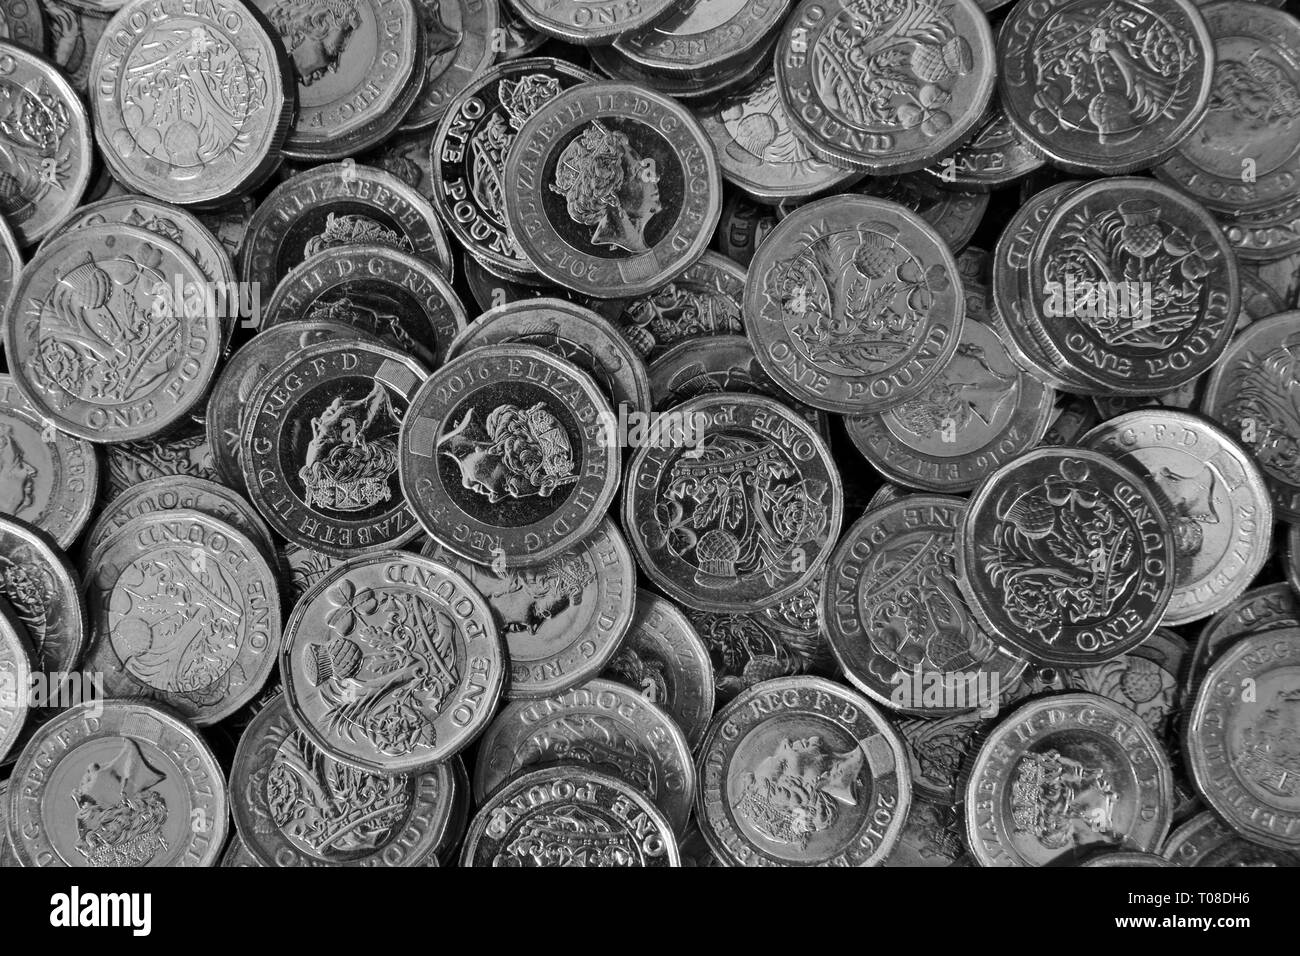 Pile of new UK One Pound Coins Stock Photo